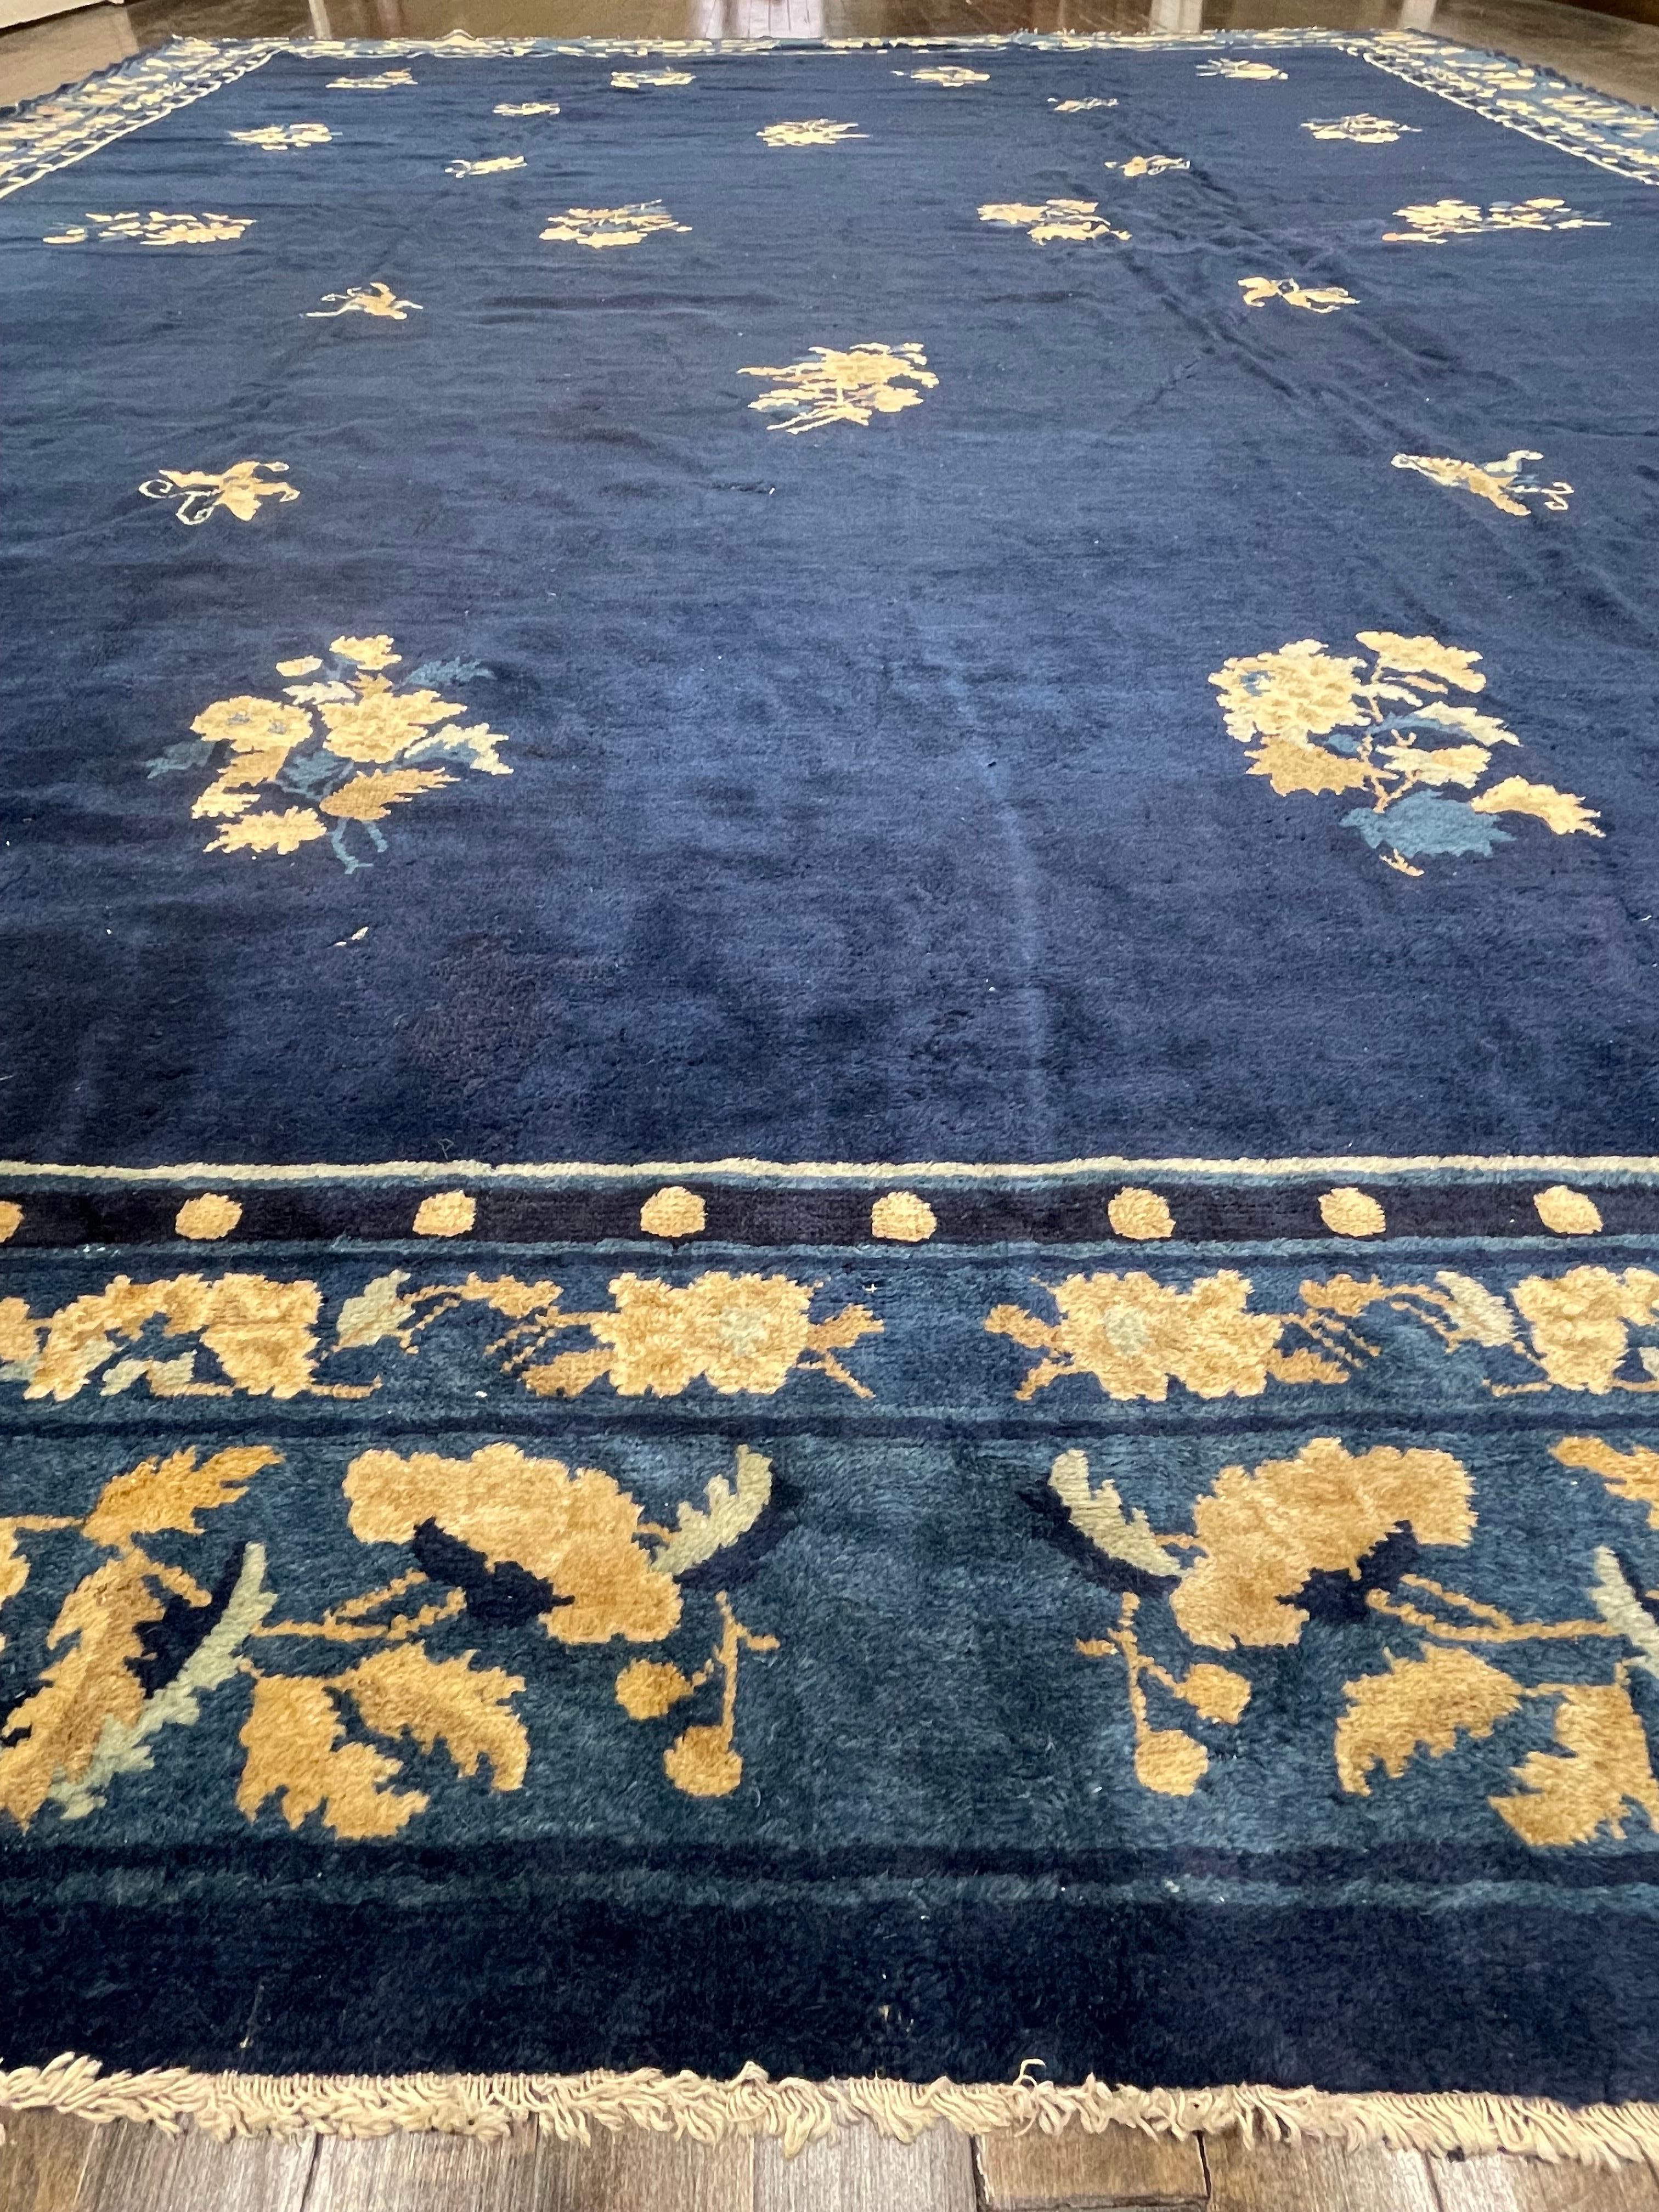 Antique Chinese Peking Rug, Circa 1900 In Good Condition For Sale In Morton Grove, IL